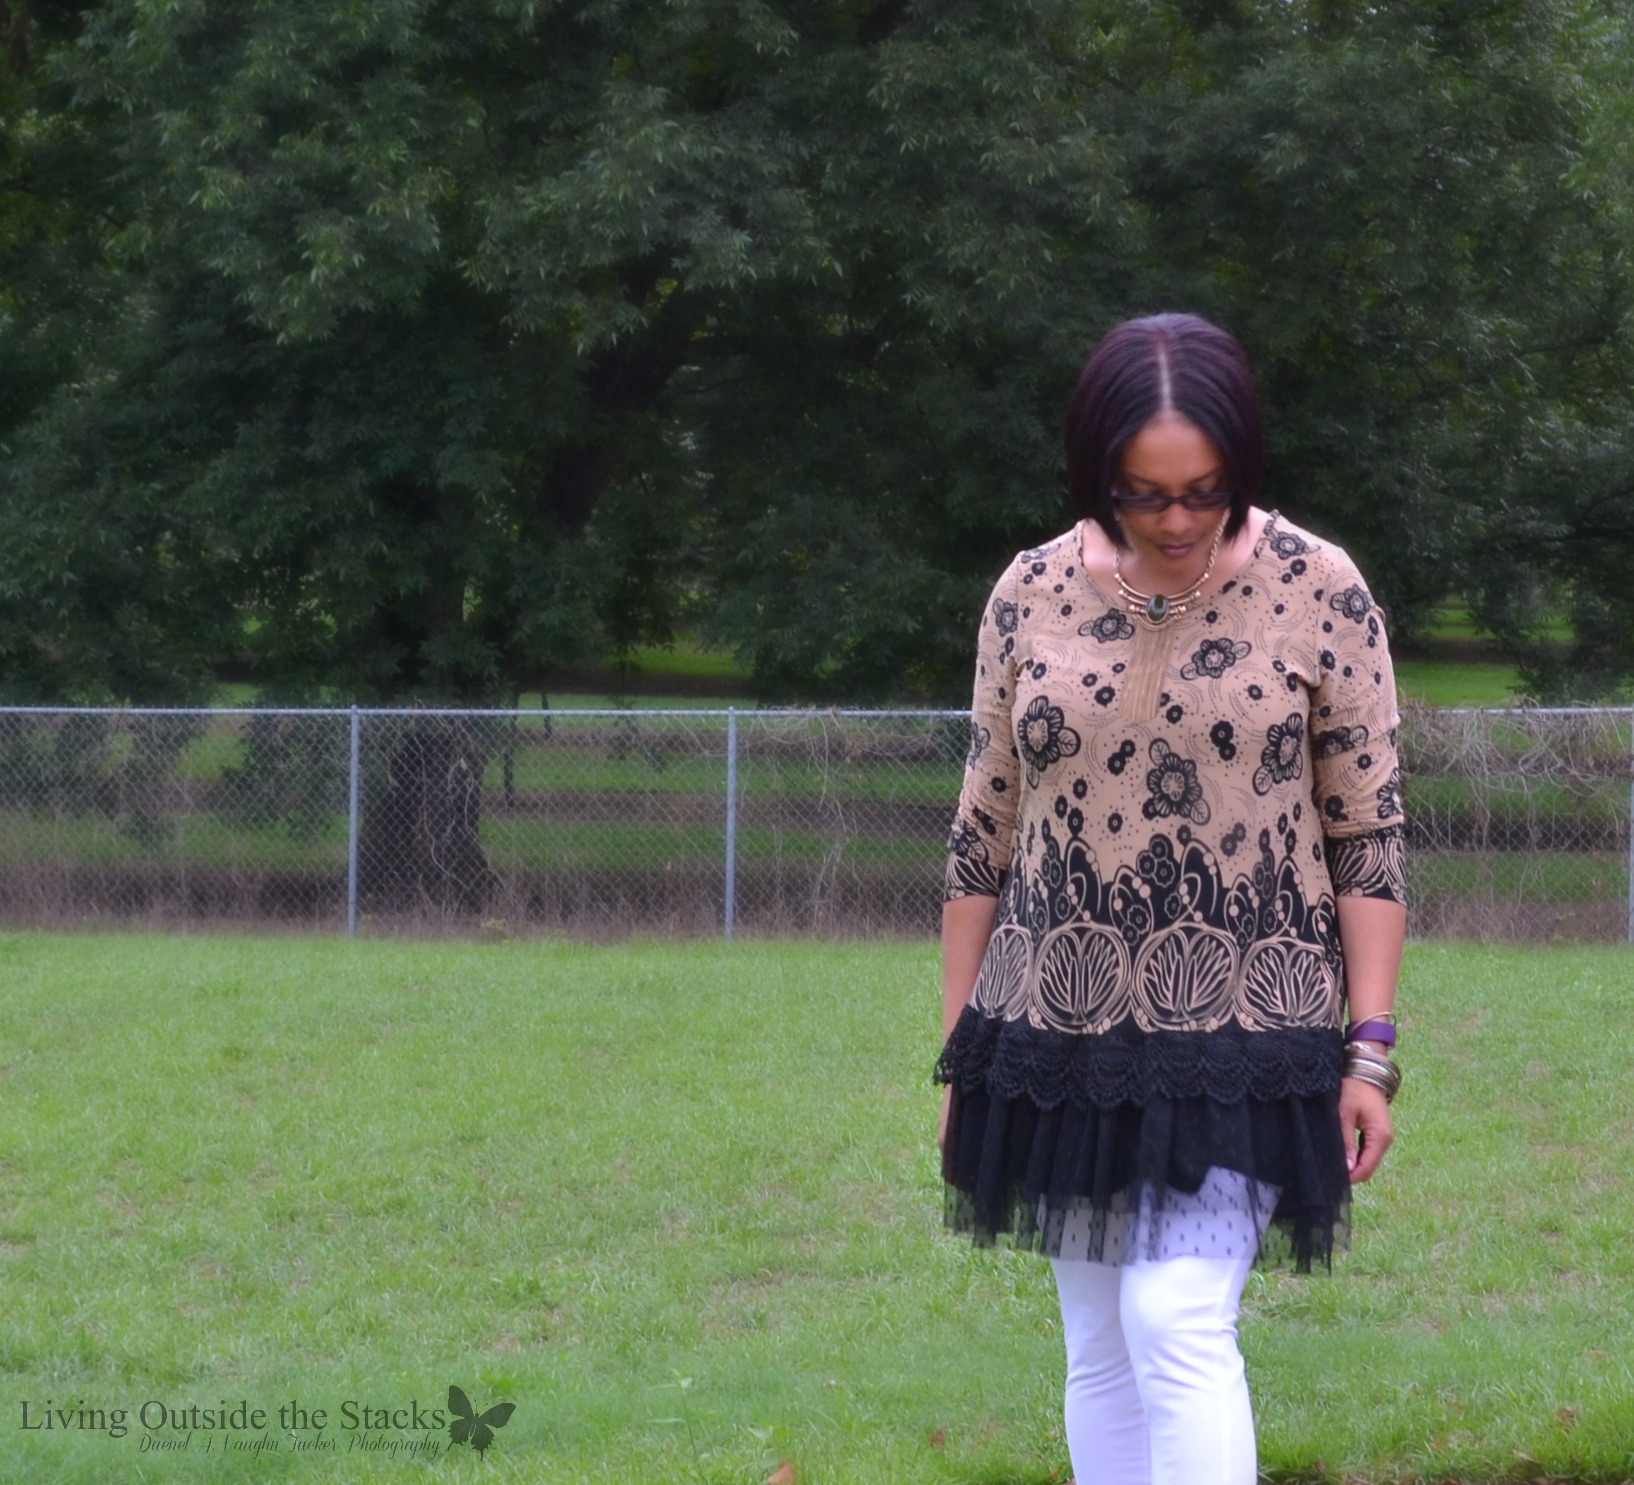 Brown and Tan Lace Bottom Tunic from #Zulily with White Leggings from #Kmart and Wedges from #Target {living outside the stacks}